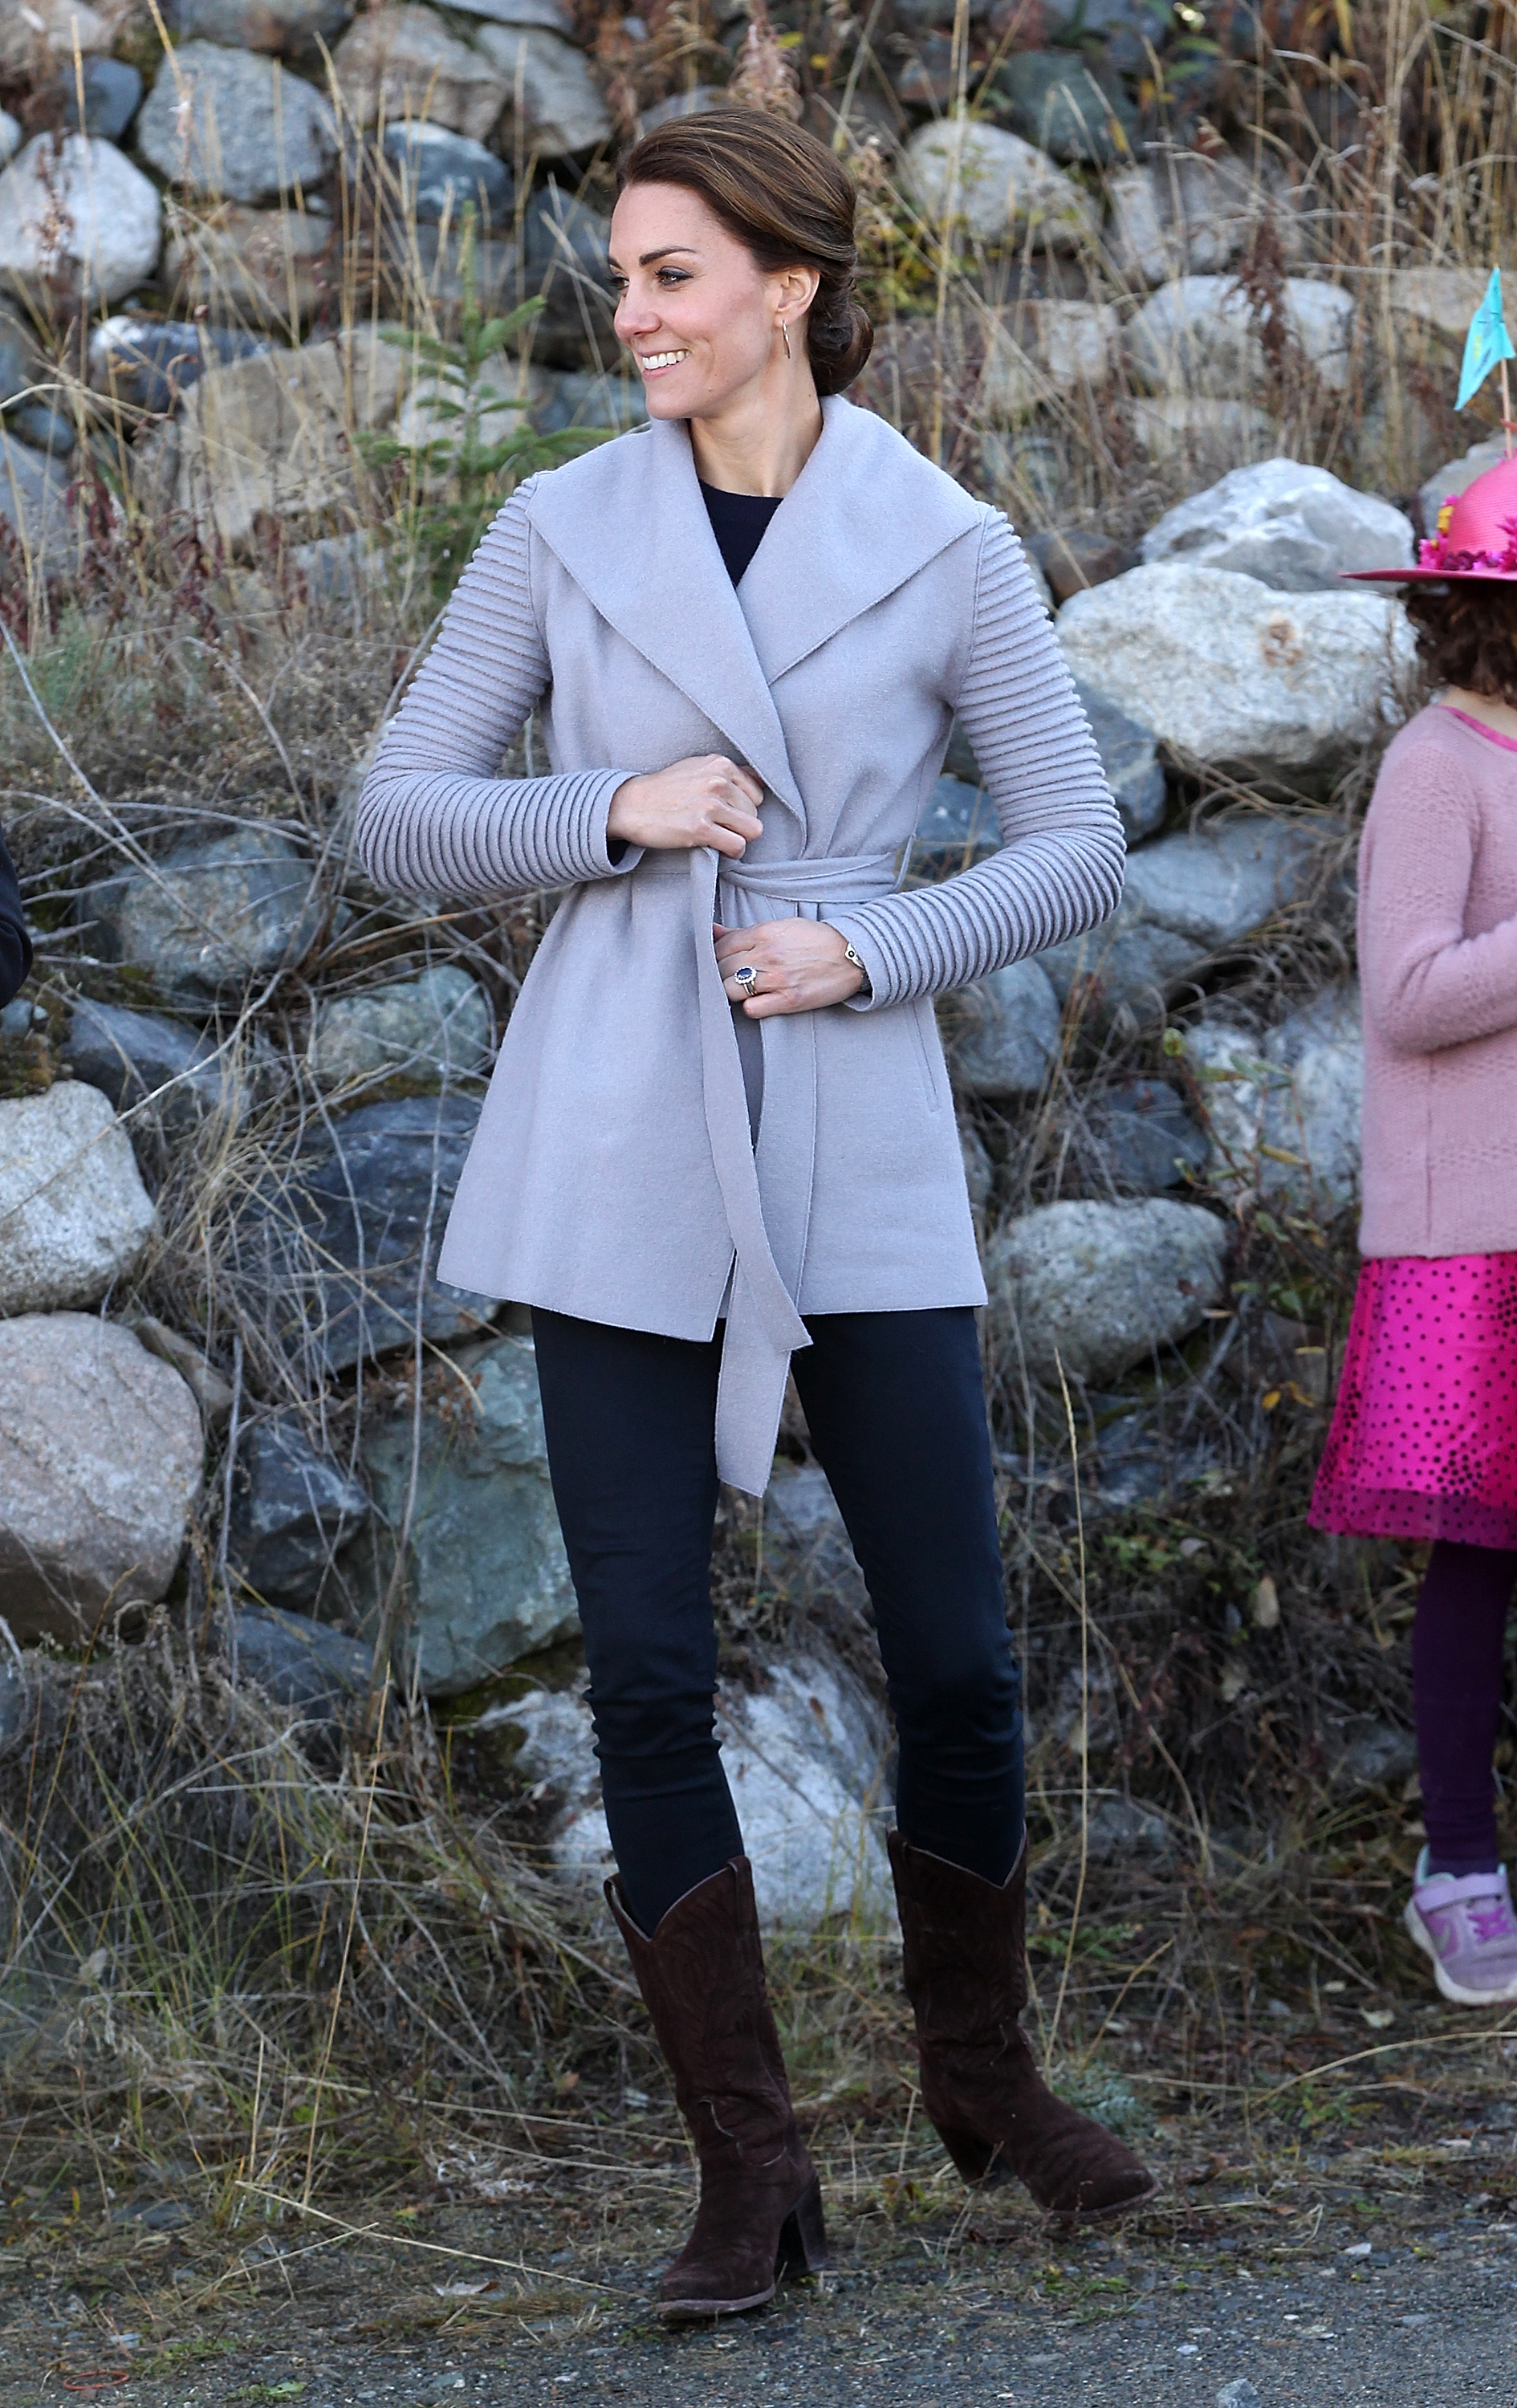 Catherine, Duchess of Cambridge, visits Carcross during the Royal Tour of Canada on Sept. 28, 2016.